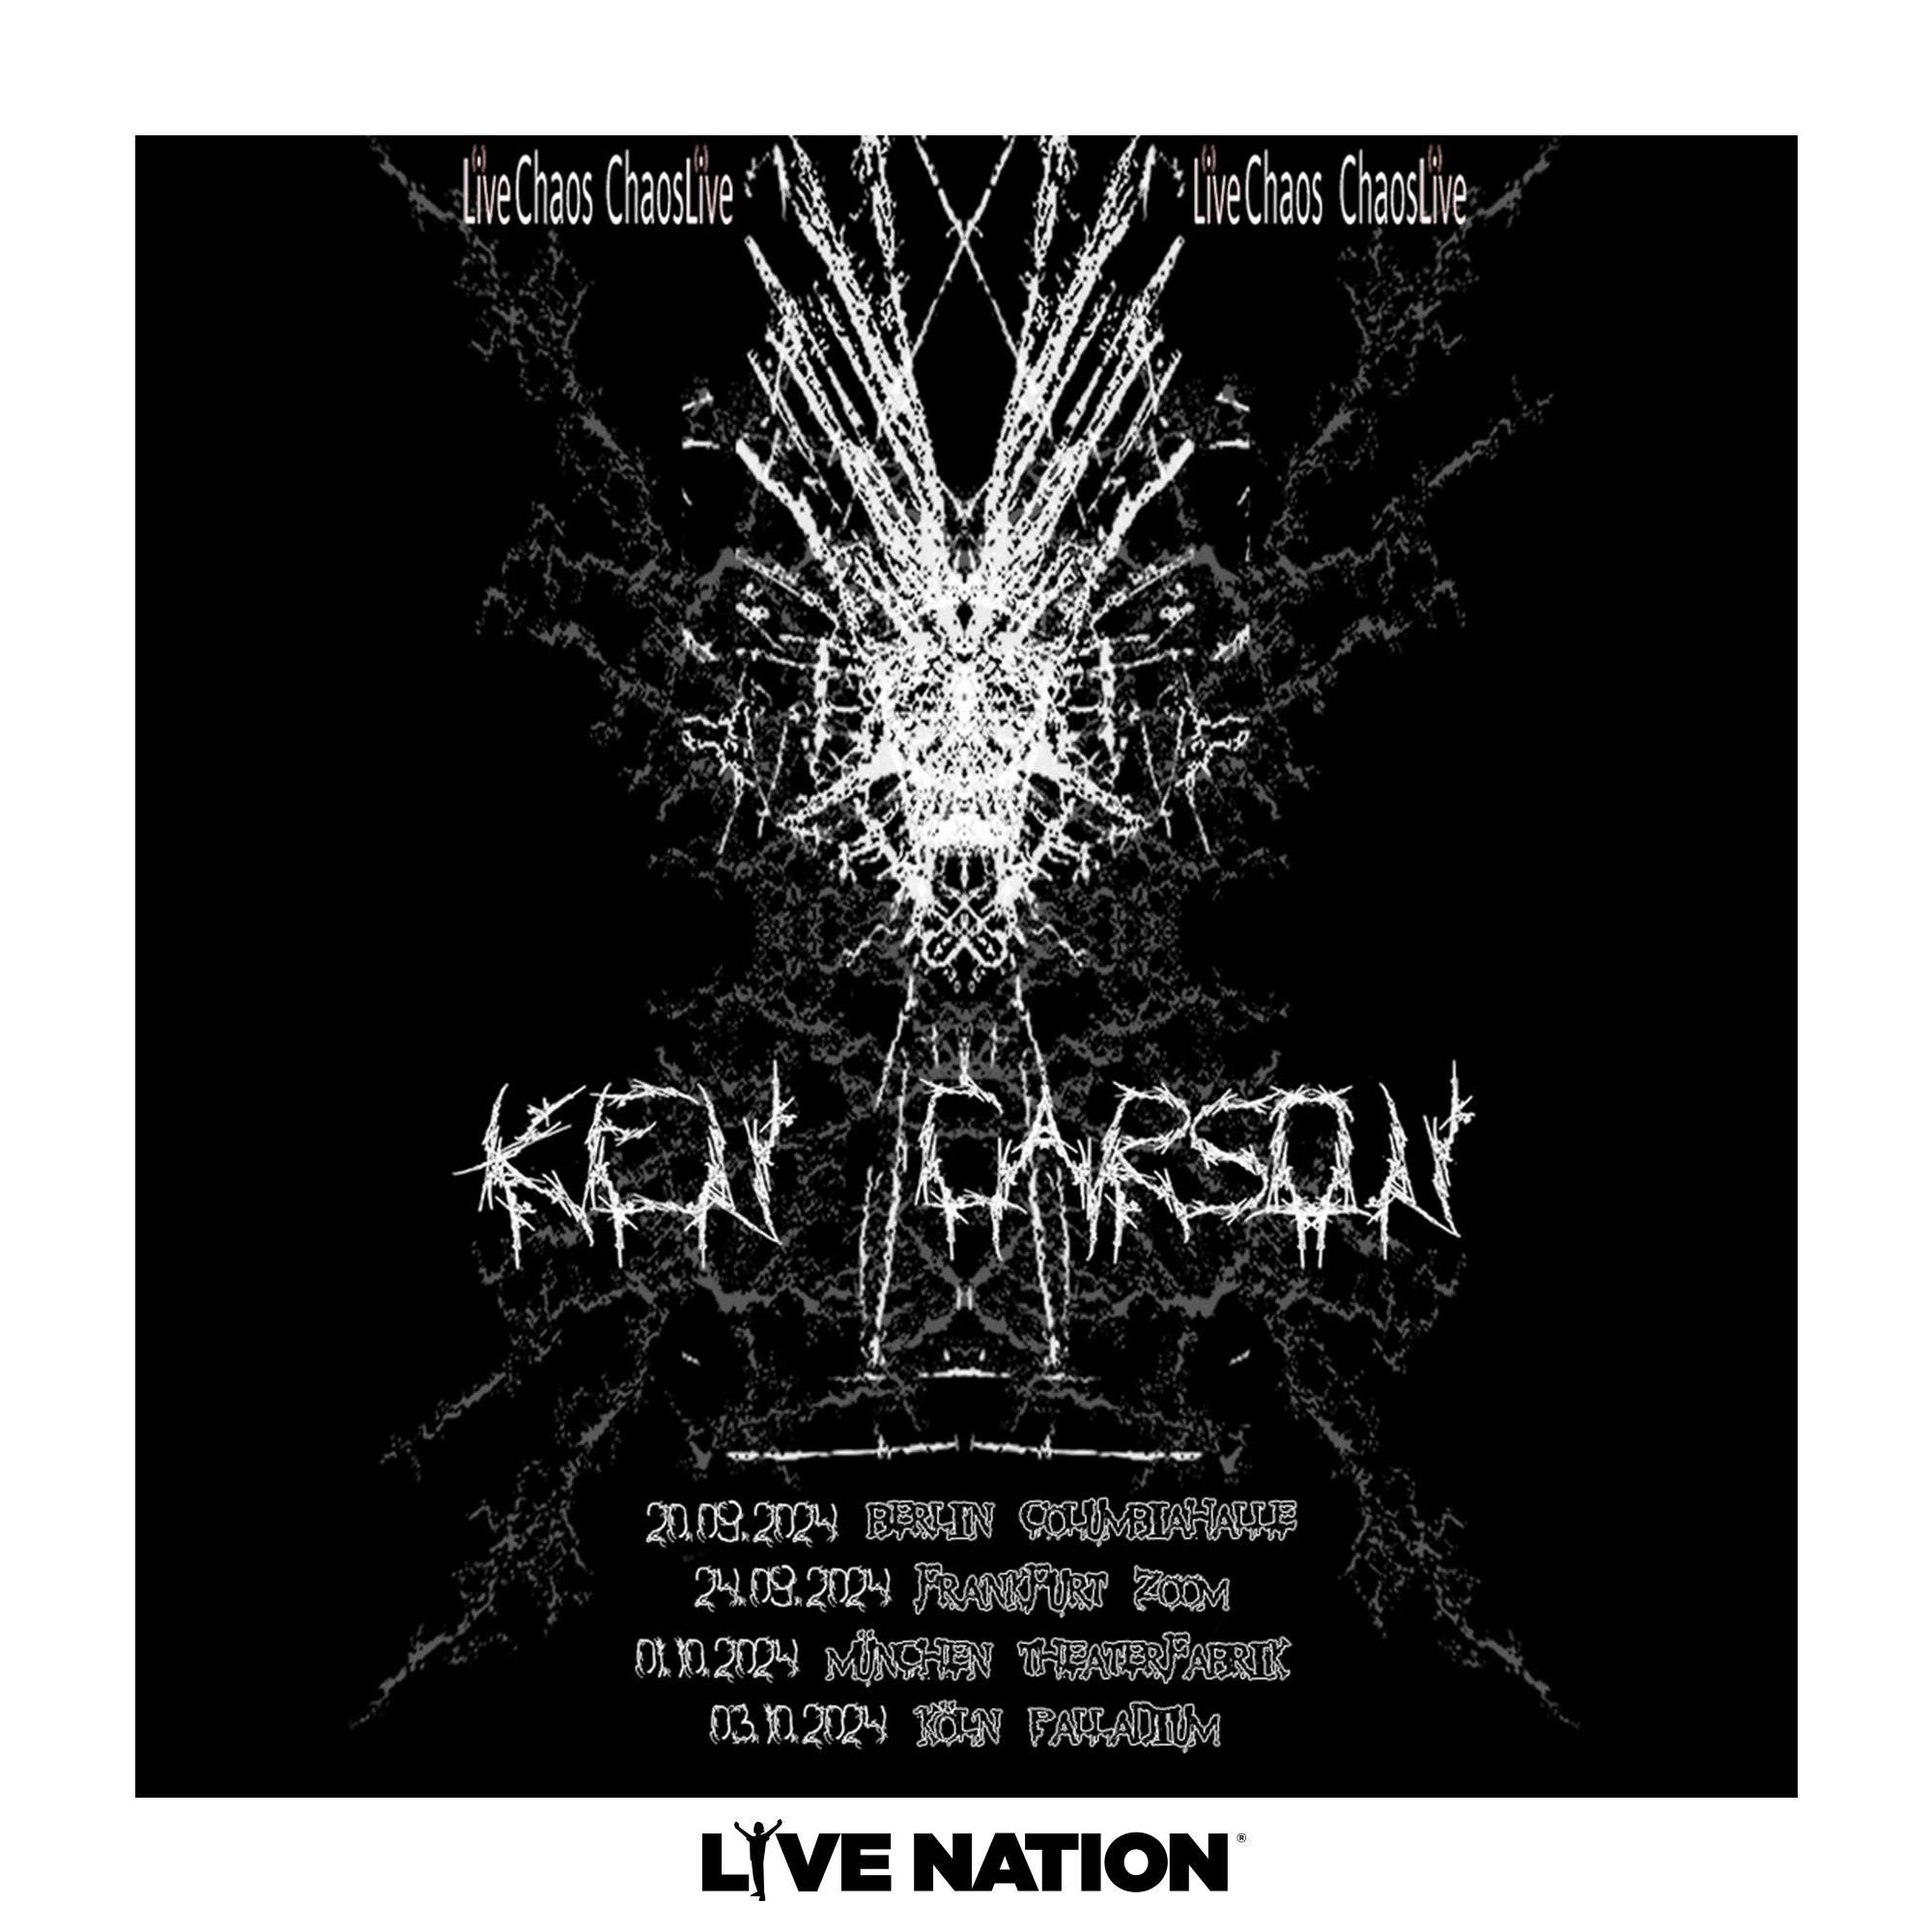 Ken Carson at Columbiahalle Tickets